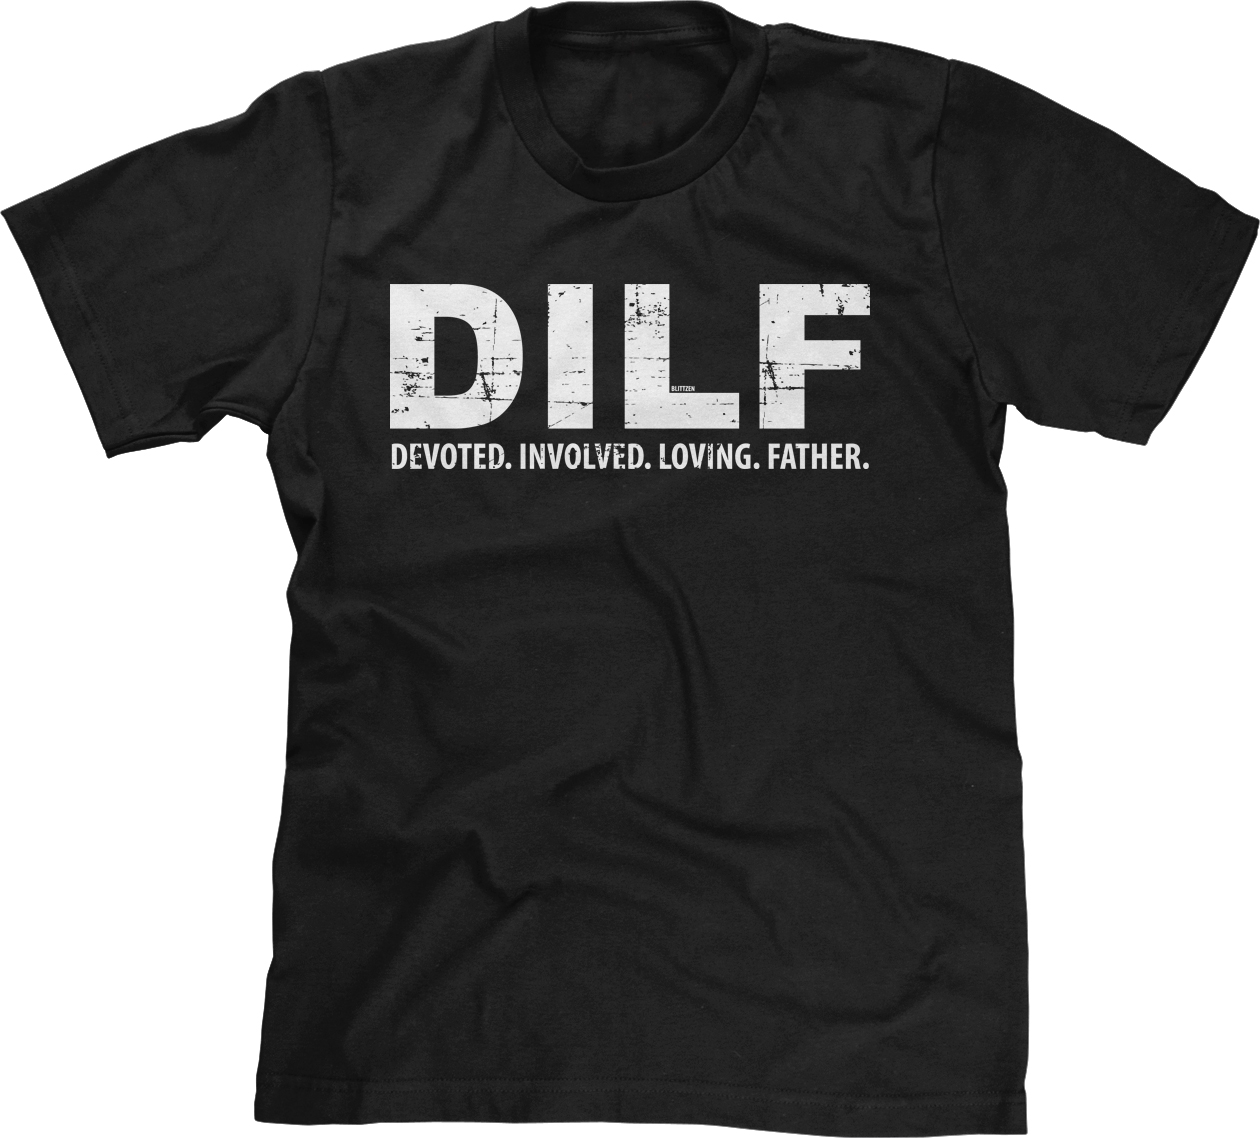 DILF Shirt Dad Shirt Gifts for Dad New Dad Gift Devoted Involved Loving Father Shirt Father's Day Gift for Dad Fathers Day Shirt